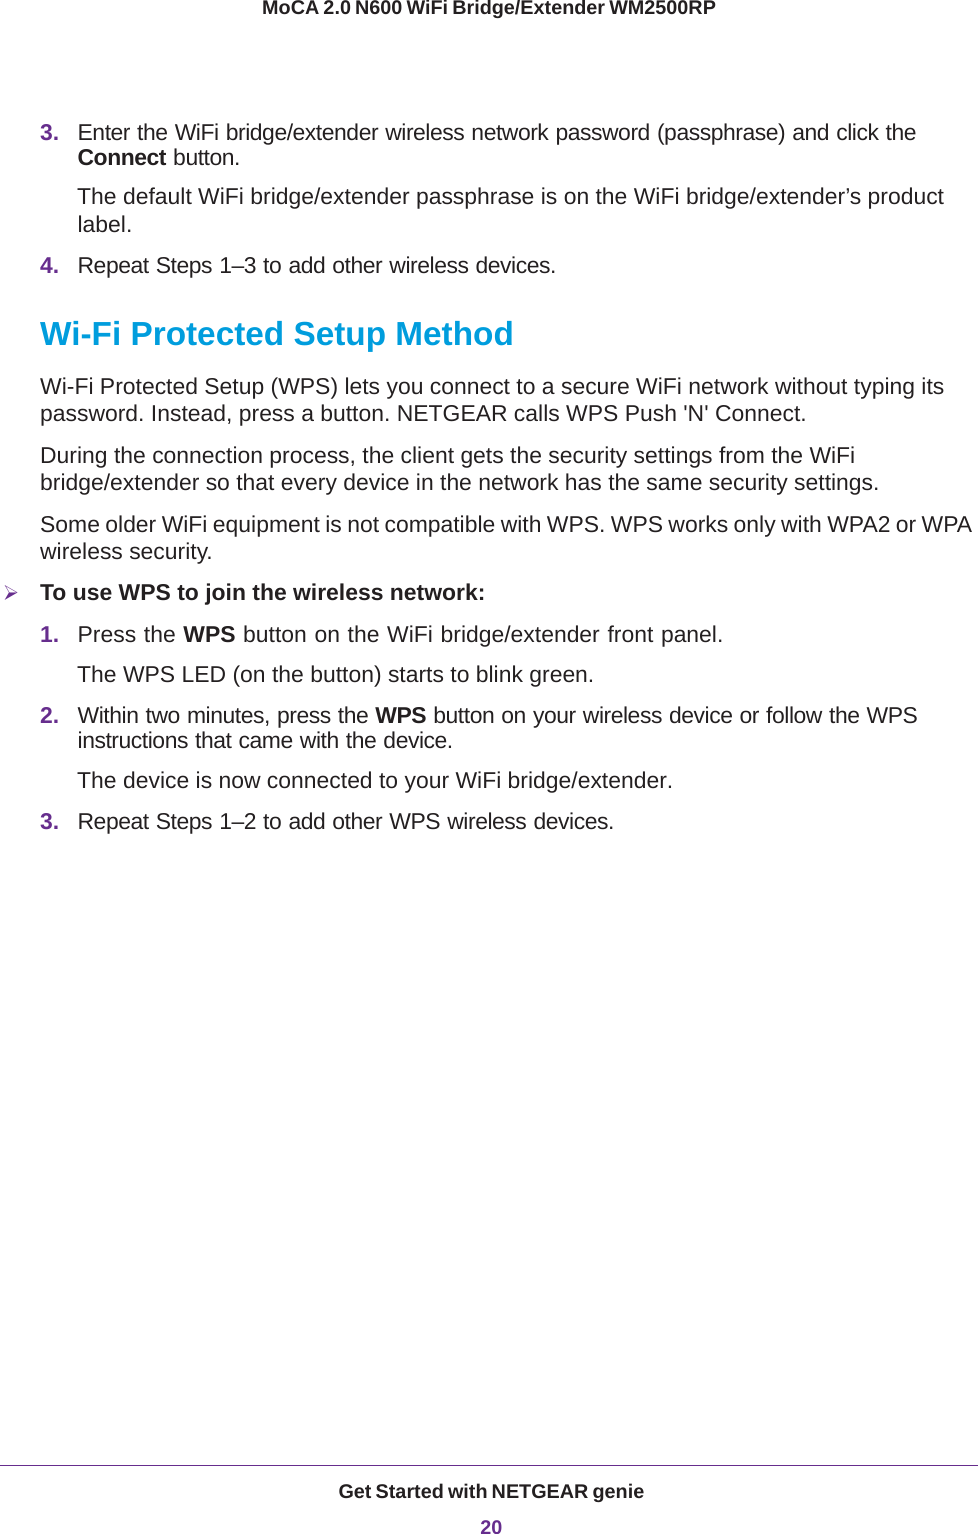 Get Started with NETGEAR genie20MoCA 2.0 N600 WiFi Bridge/Extender WM2500RP 3. Enter the WiFi bridge/extender wireless network password (passphrase) and click the Connect button.The default WiFi bridge/extender passphrase is on the WiFi bridge/extender’s product label.4. Repeat Steps 1–3 to add other wireless devices.Wi-Fi Protected Setup MethodWi-Fi Protected Setup (WPS) lets you connect to a secure WiFi network without typing its password. Instead, press a button. NETGEAR calls WPS Push &apos;N&apos; Connect.During the connection process, the client gets the security settings from the WiFi bridge/extender so that every device in the network has the same security settings.Some older WiFi equipment is not compatible with WPS. WPS works only with WPA2 or WPA wireless security.To use WPS to join the wireless network:1. Press the WPS button on the WiFi bridge/extender front panel. The WPS LED (on the button) starts to blink green.2. Within two minutes, press the WPS button on your wireless device or follow the WPS instructions that came with the device. The device is now connected to your WiFi bridge/extender.3. Repeat Steps 1–2 to add other WPS wireless devices.